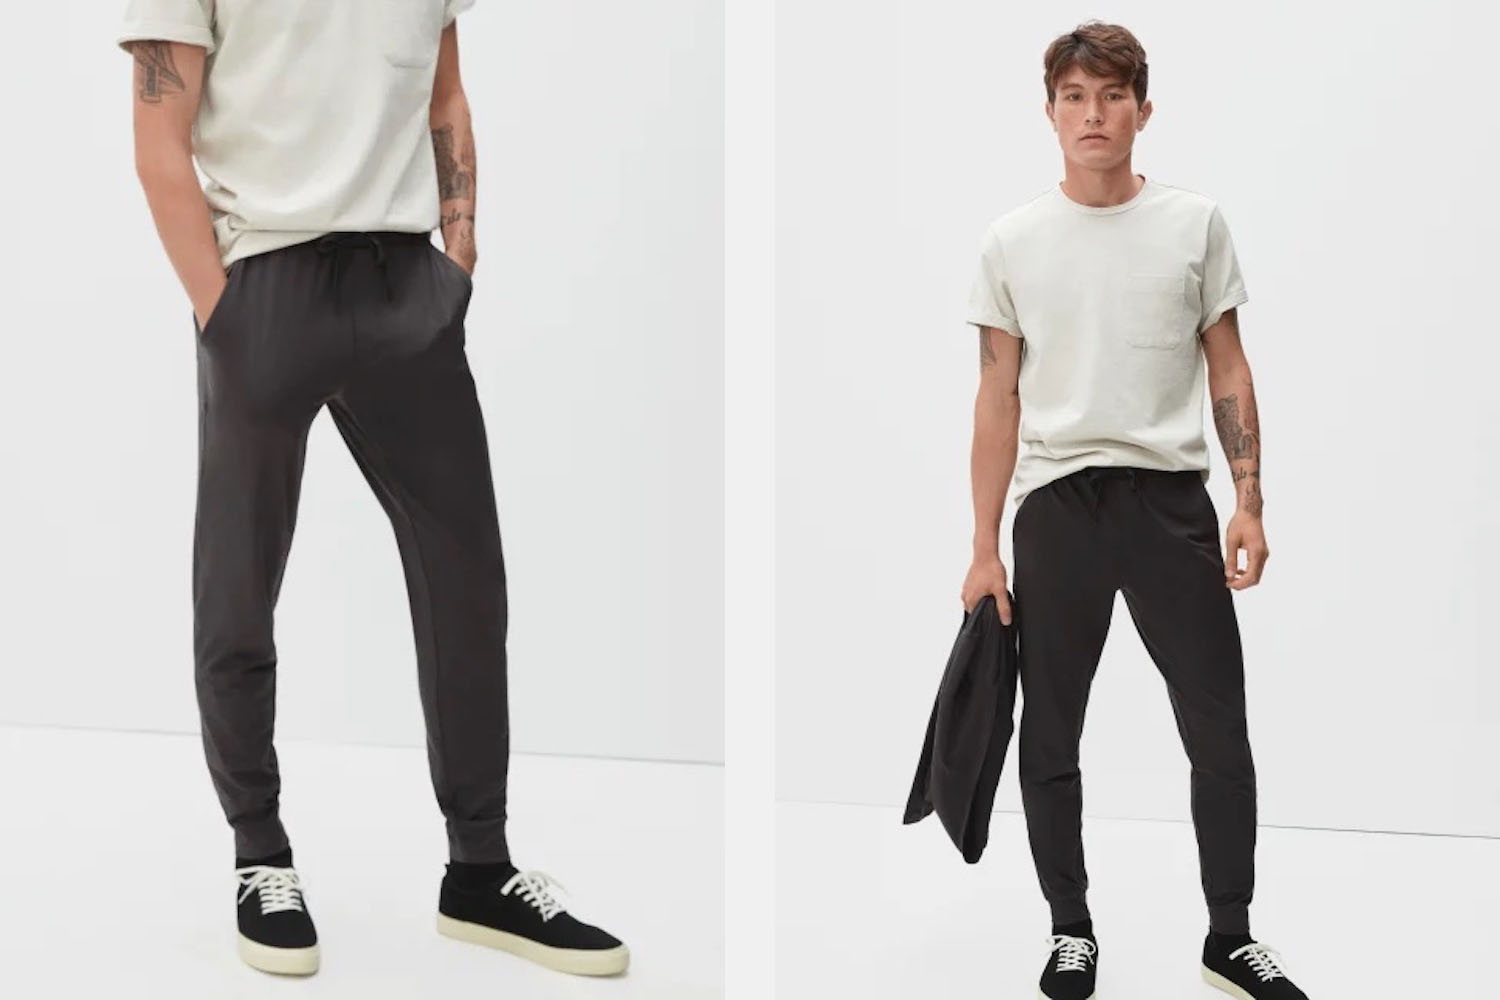 two model shots of the Everlane ReNew Air Pant